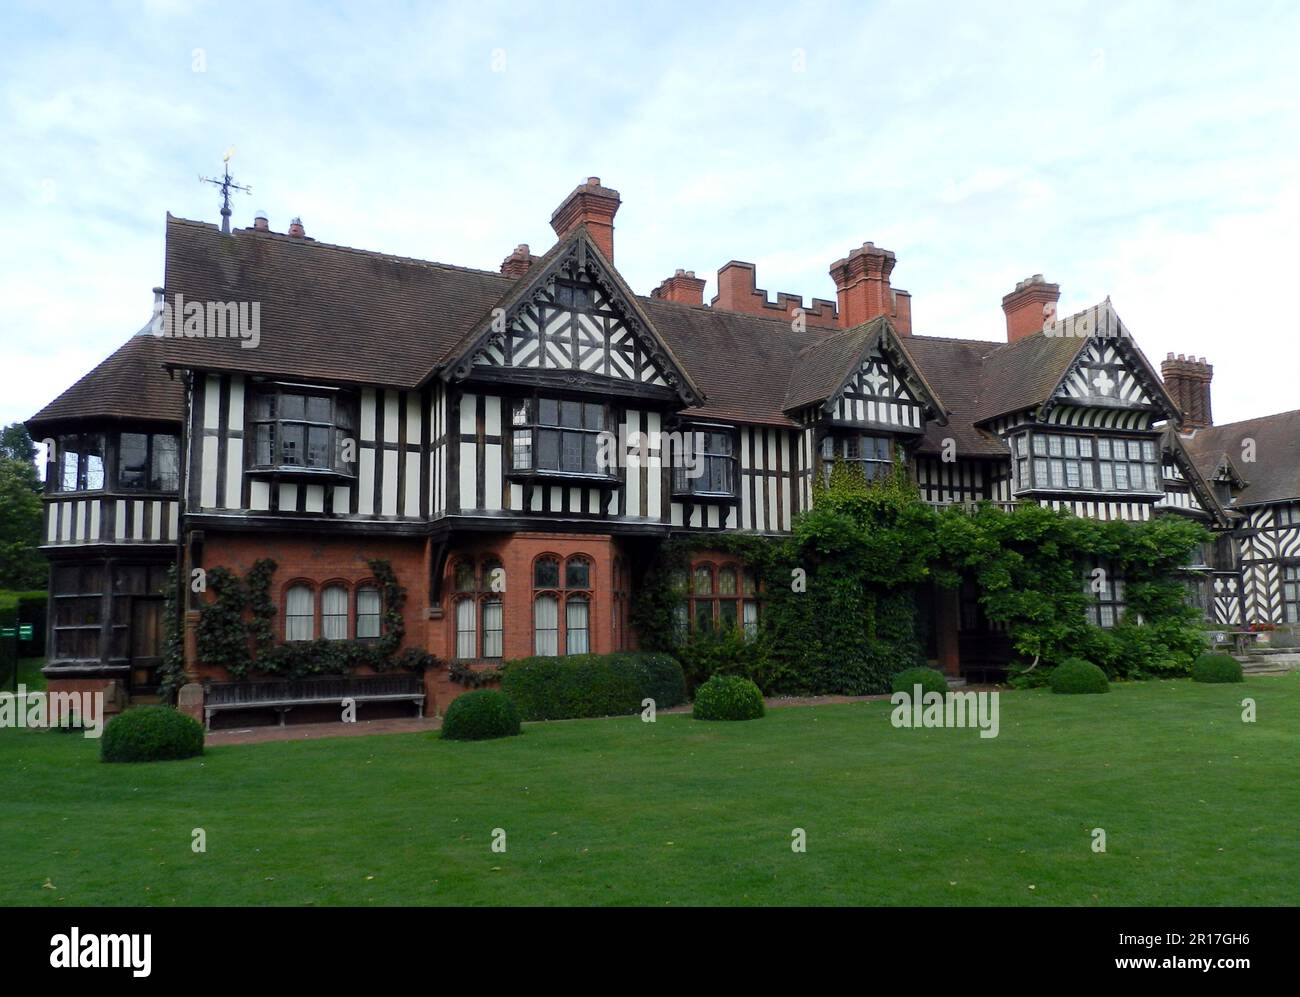 England, West Midlands:  Wightwick Manor and Gardens (National Trust), a 19th century half-timbered manor house, former home of the Mander family. Stock Photo